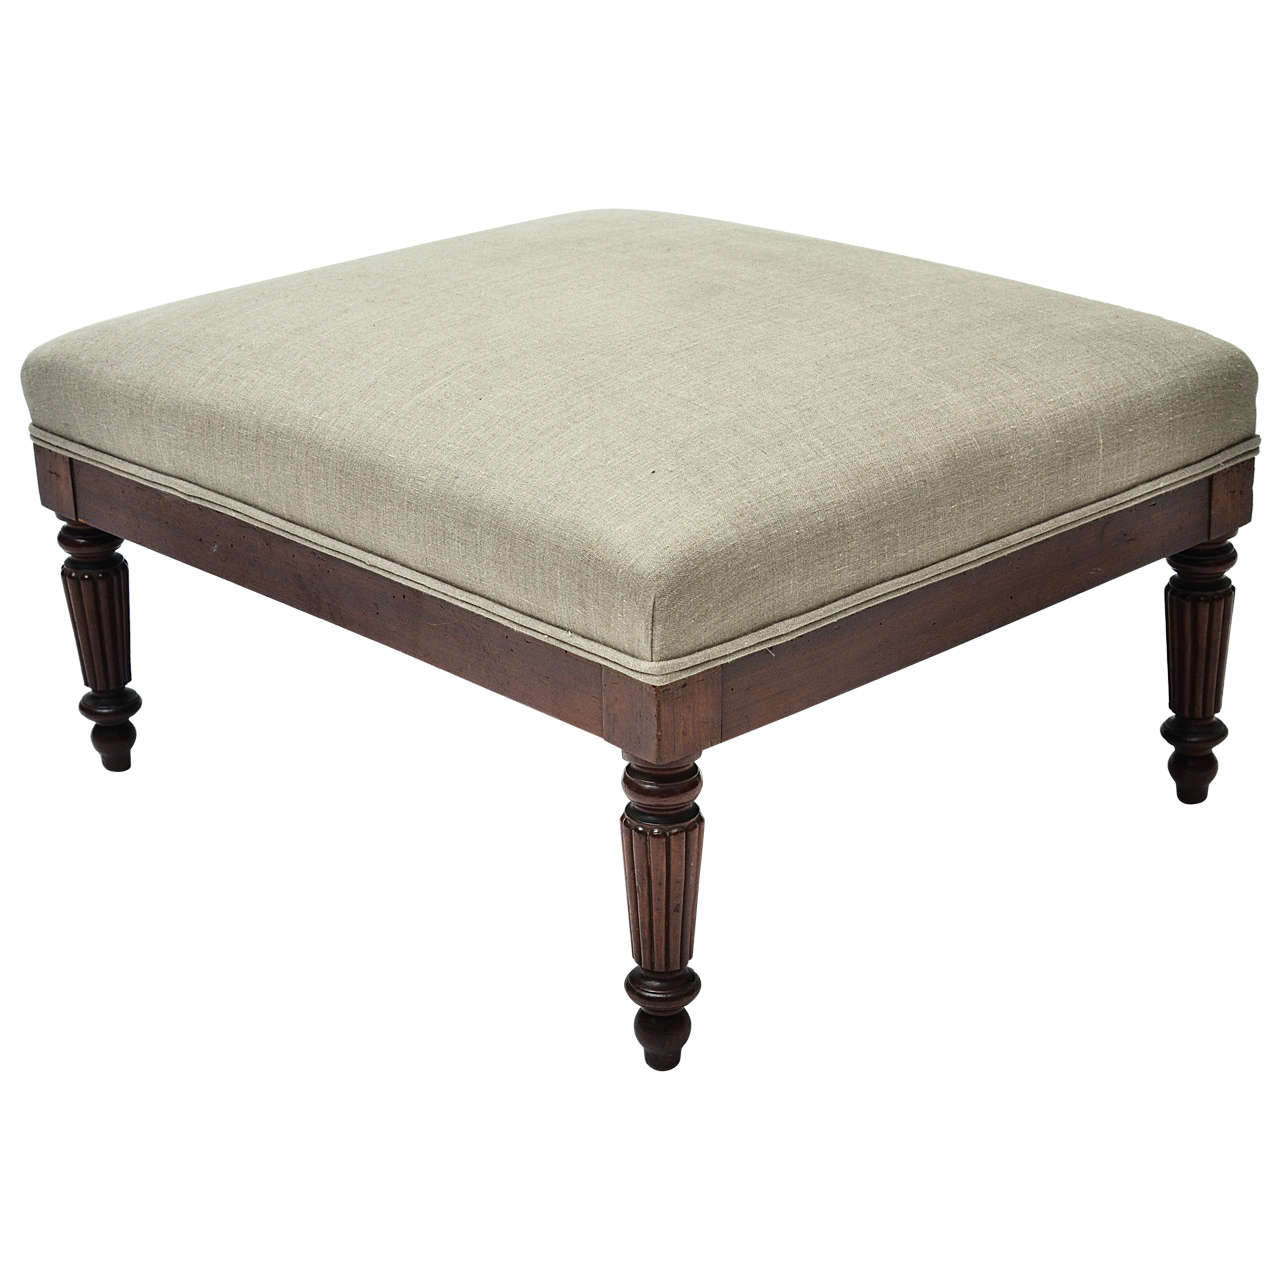 Early 19th Century Upholstered Stool